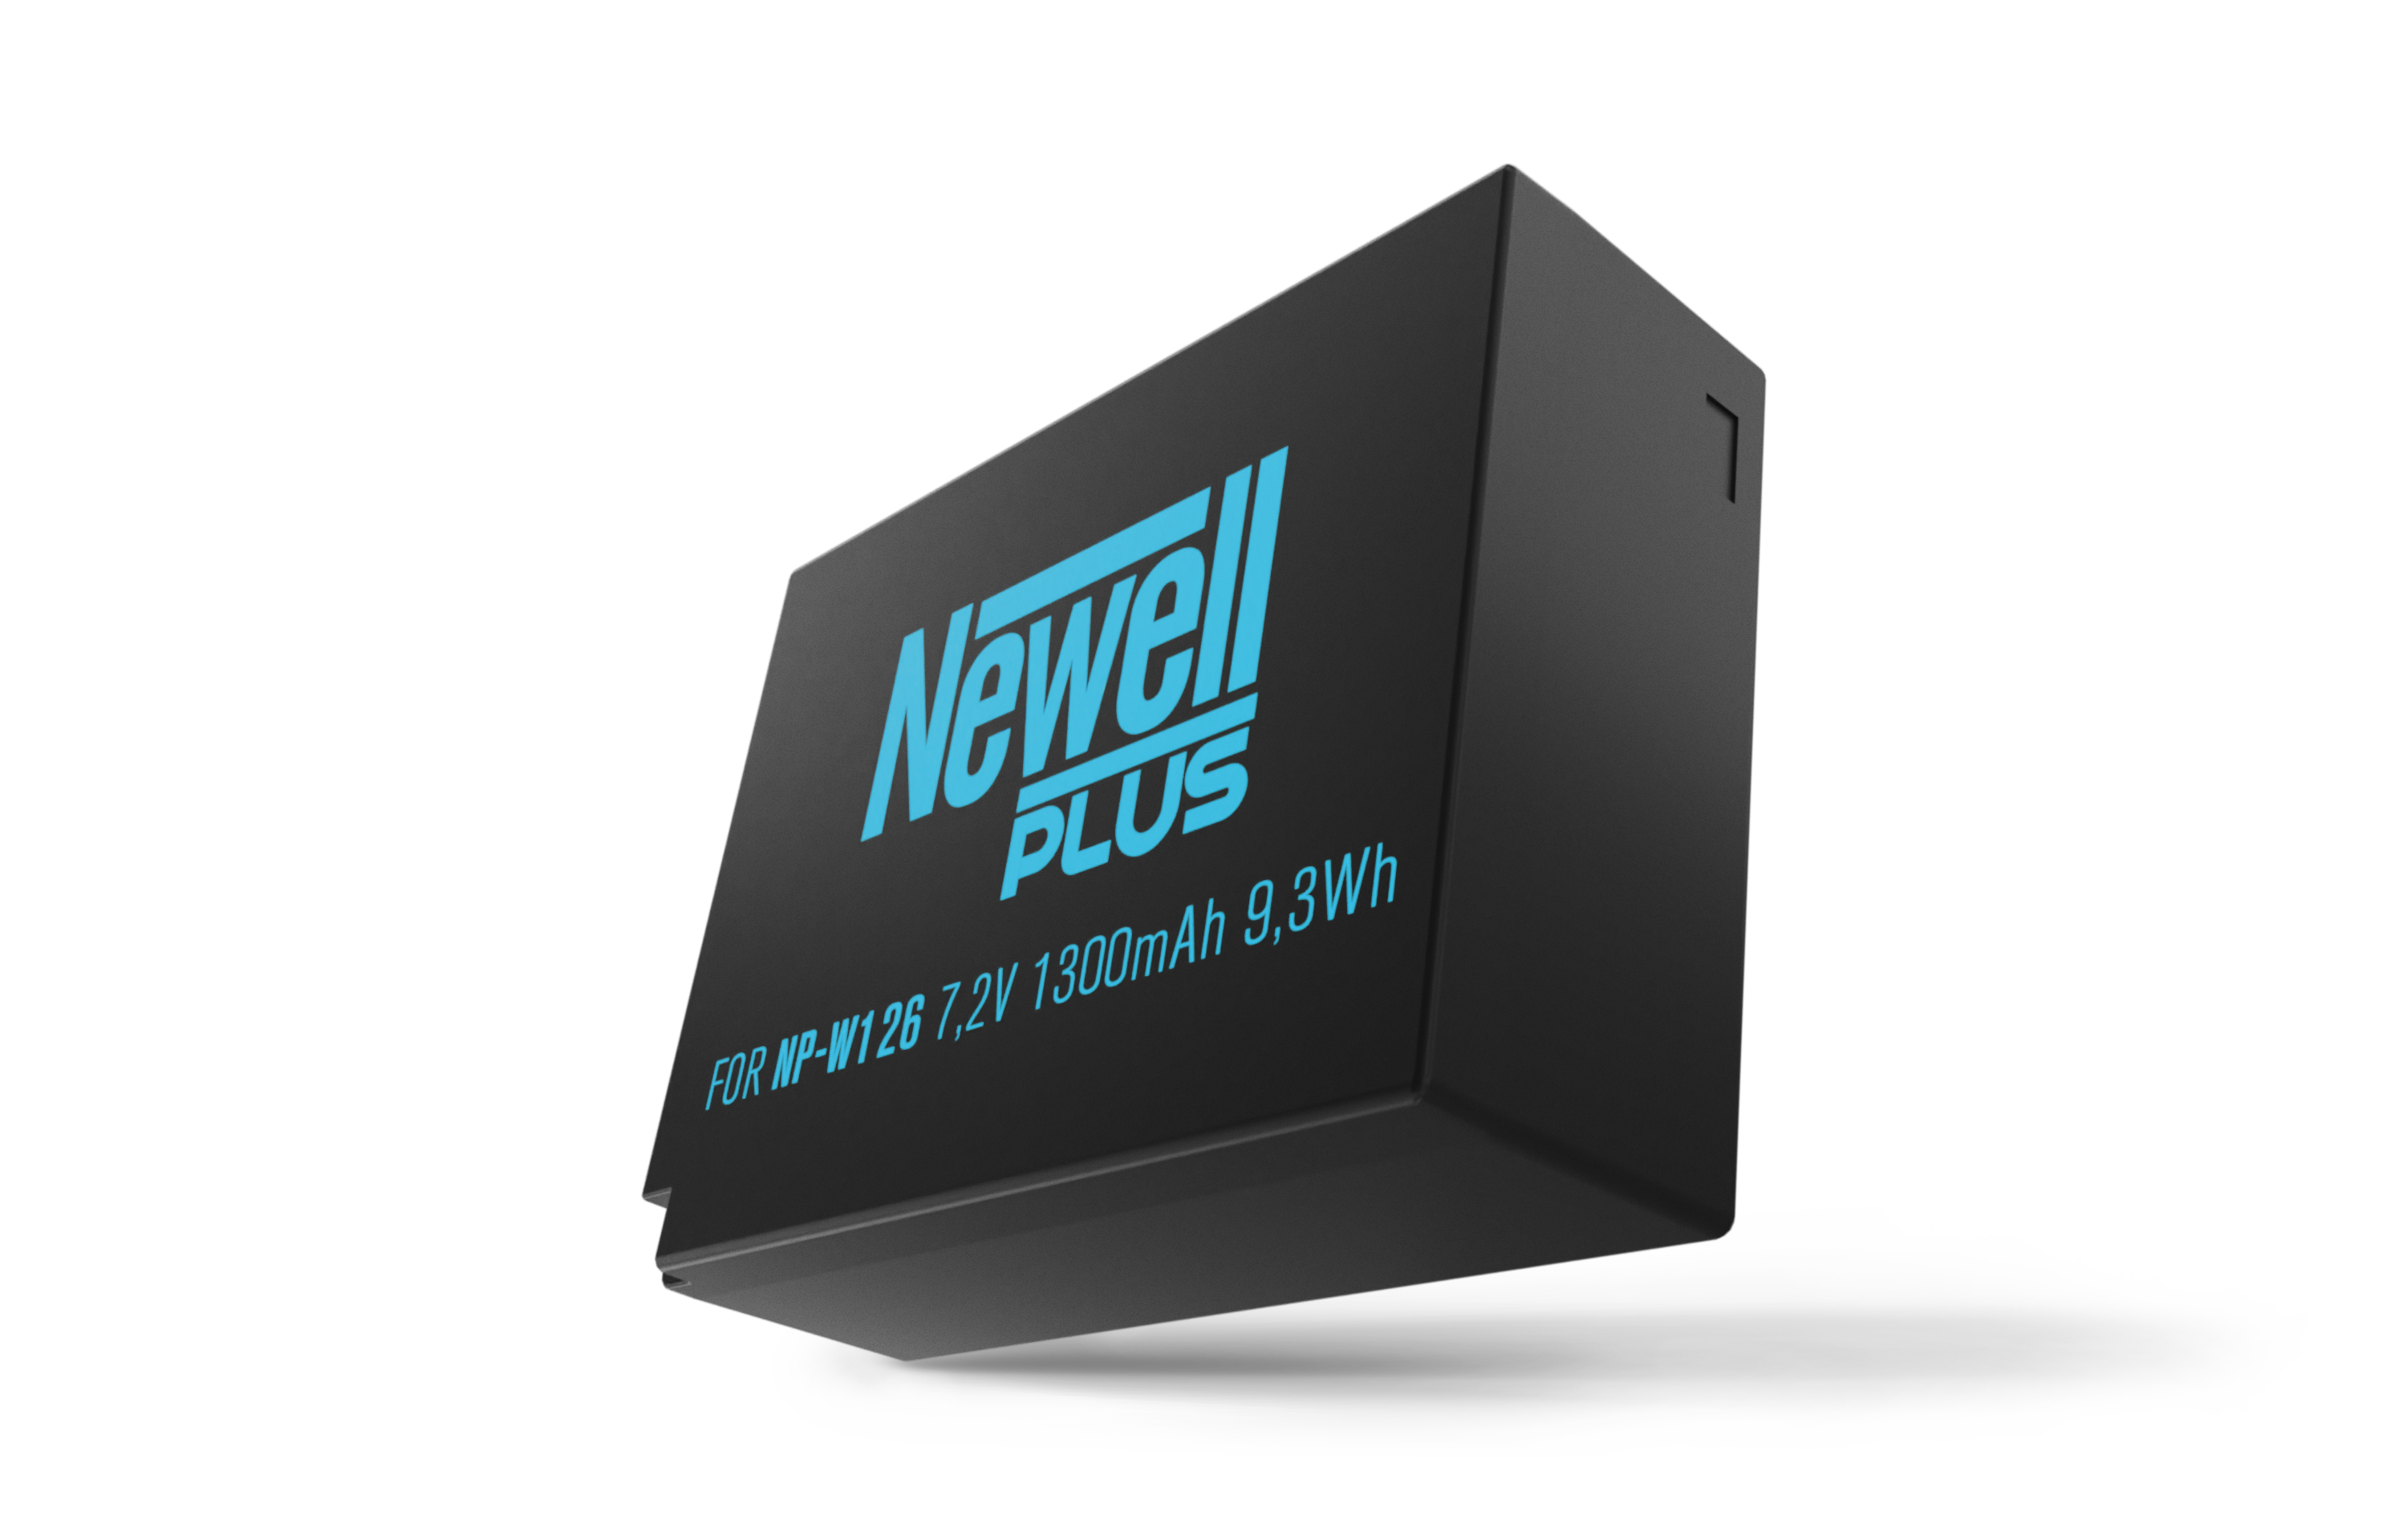 Newell PLUS battery NP-W126